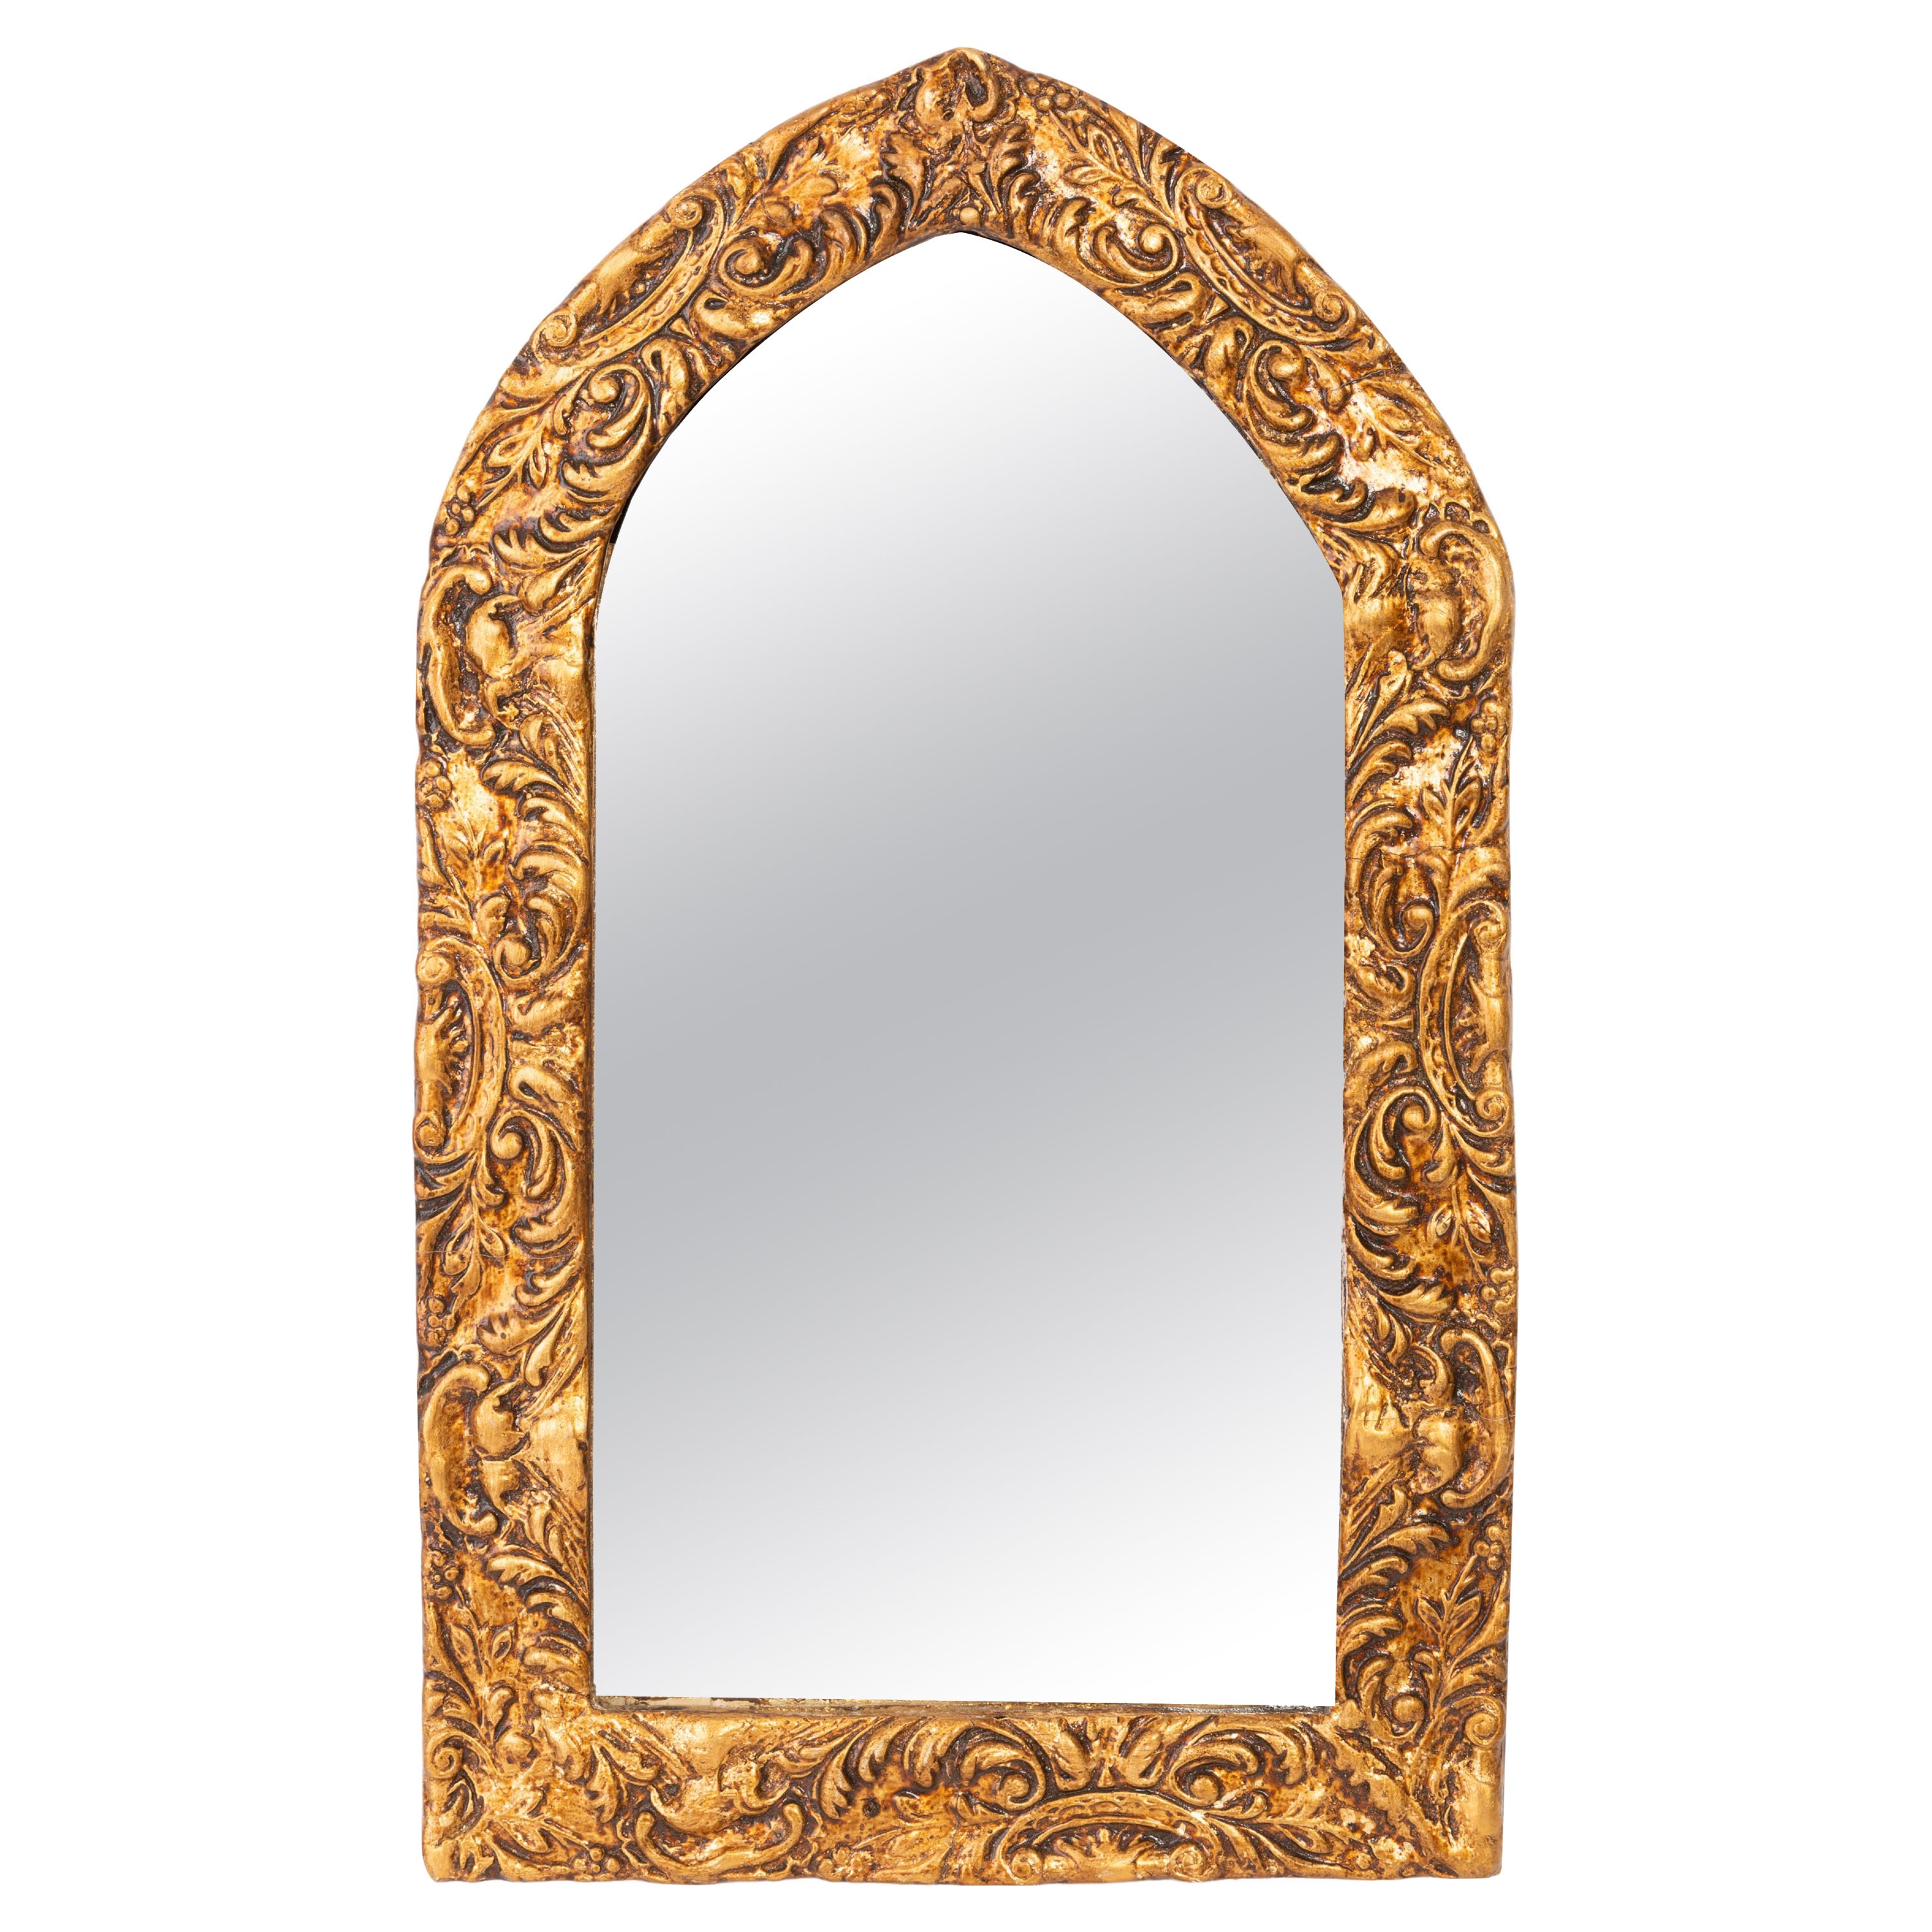 Midcentury Vintage Old Gold Wood Medium Mirror with Flowers, Italy, 1960s For Sale